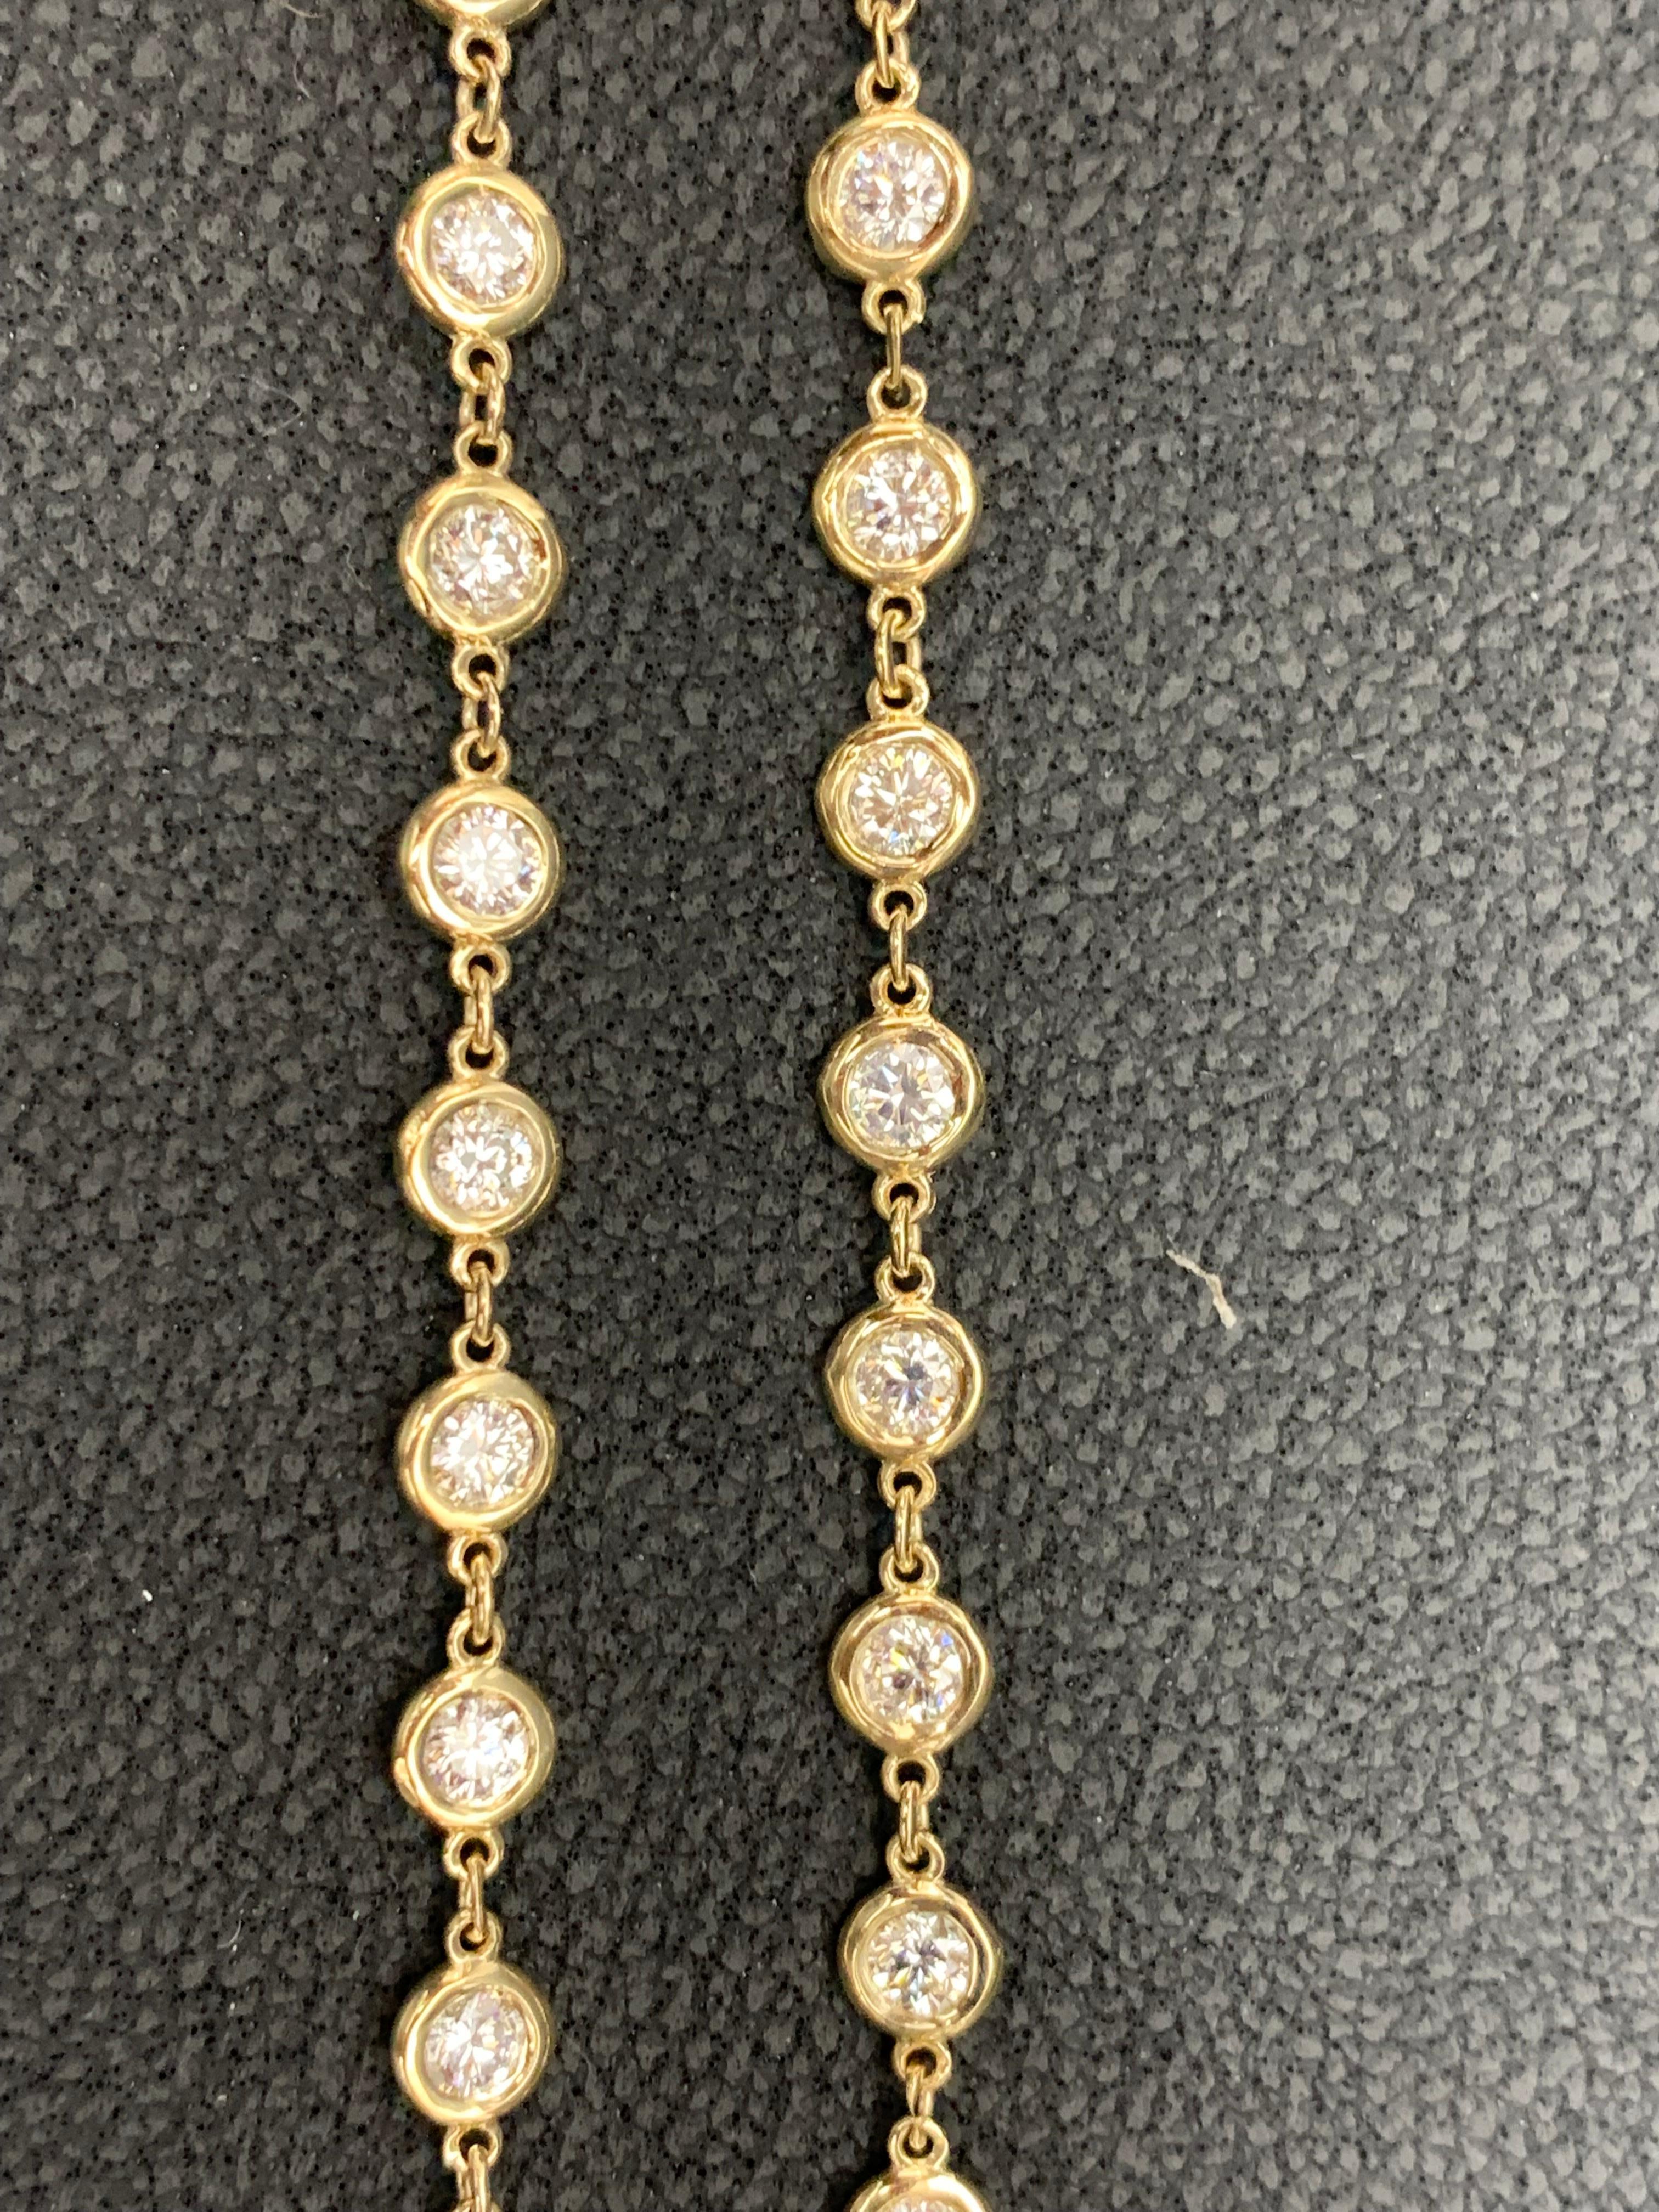 An antique style diamond by the yard necklace showcasing a row of round brilliant diamonds, set in a  bezel design made in 14k yellow gold. Each diamond is spaced evenly on an 24-inch yellow gold chain. 79 Diamonds weigh 6.60 carats total.